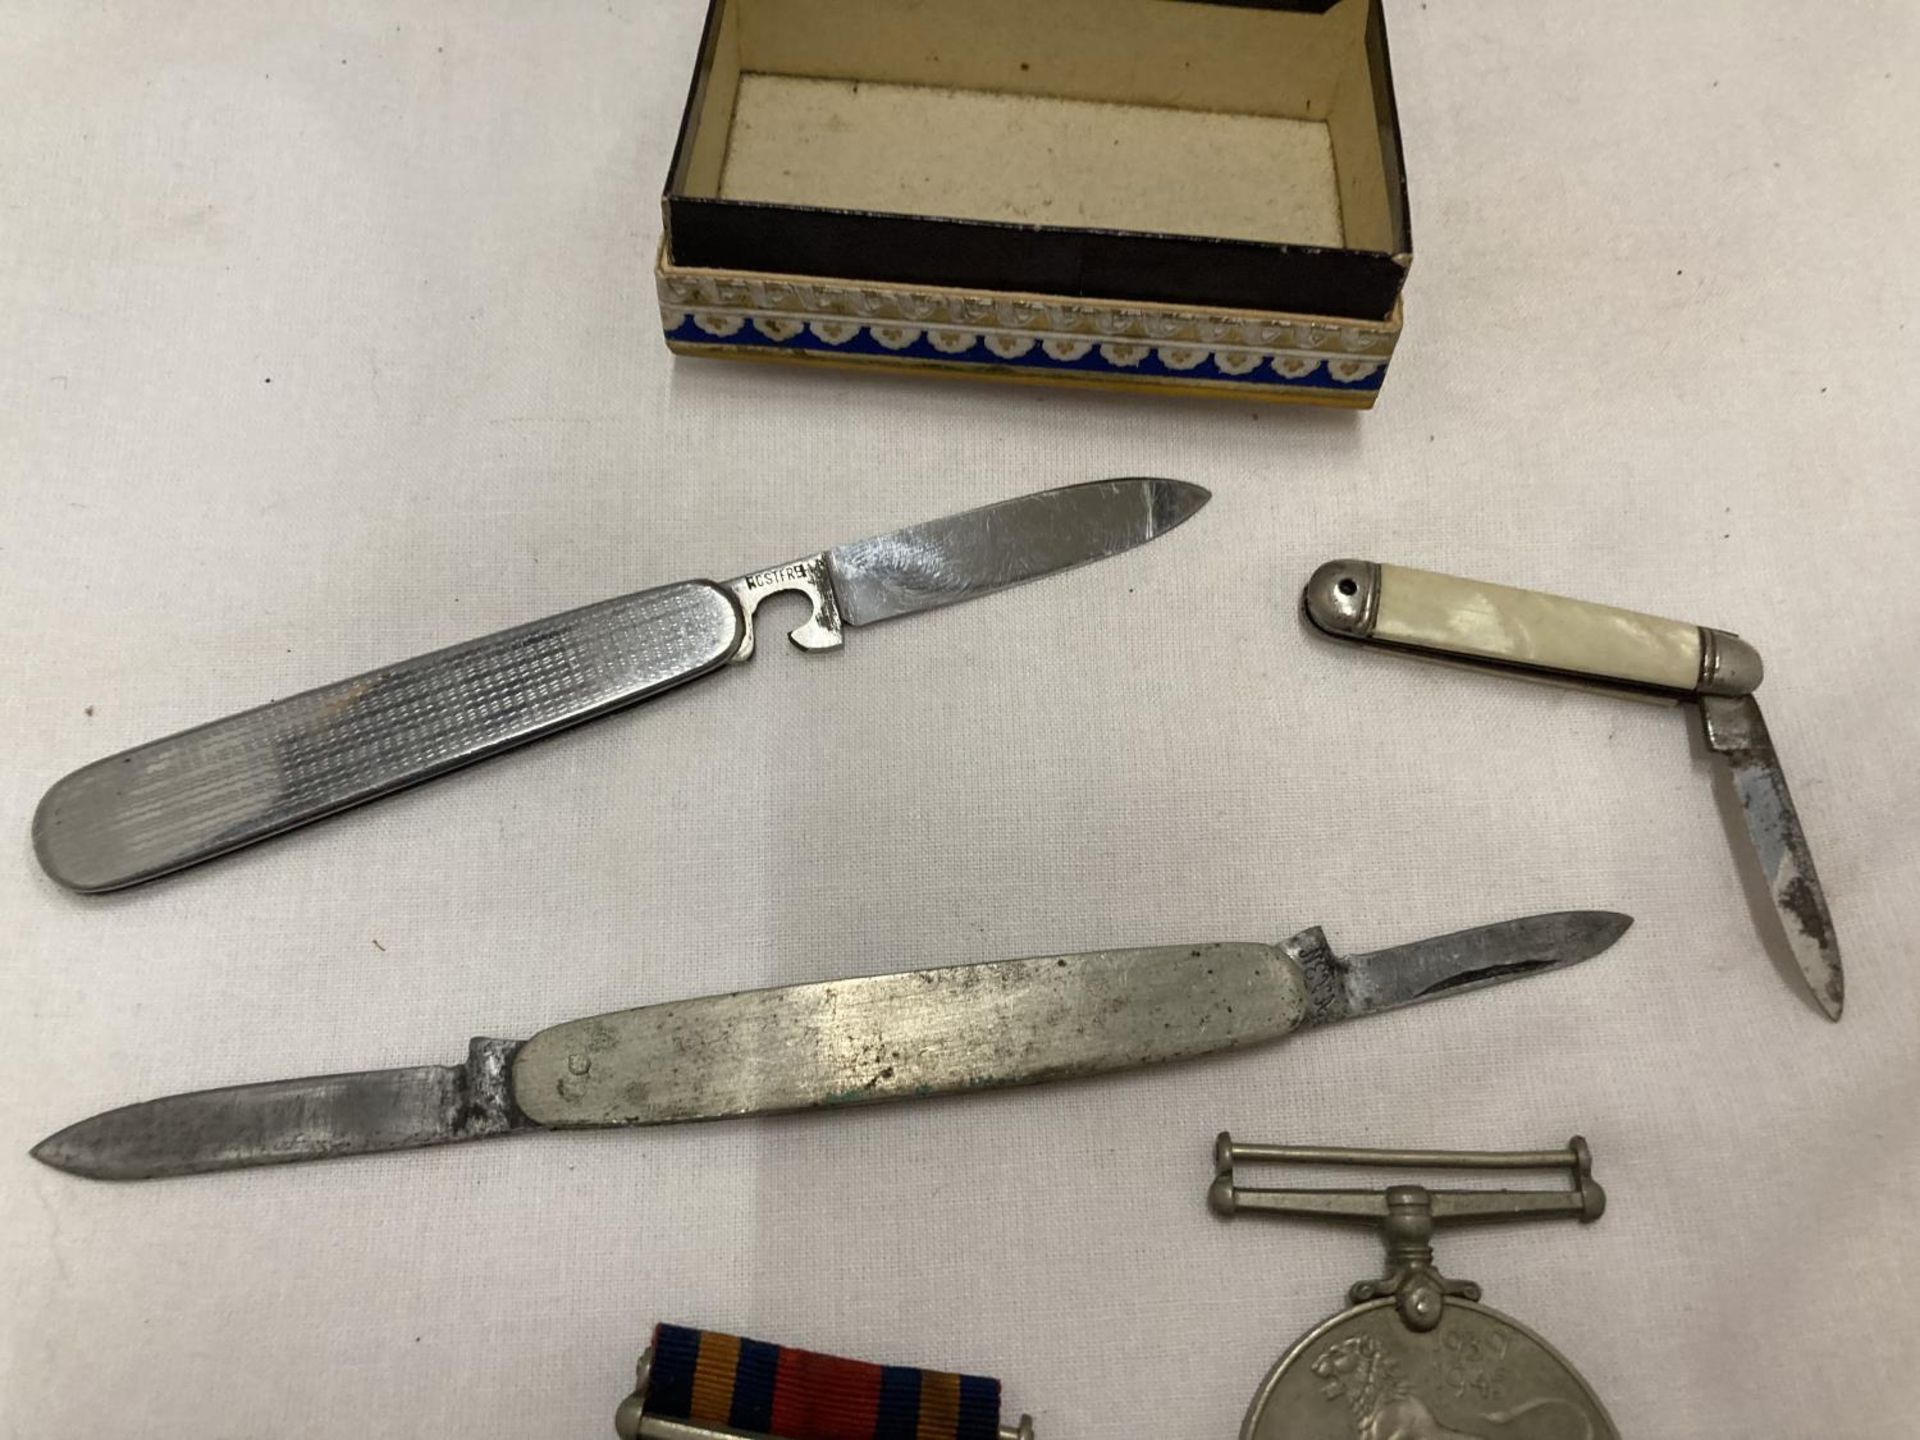 A 1939/45 MILITARY MEDAL, A DEFENCE MEDAL AND TWO PENKNIVES - Image 4 of 5